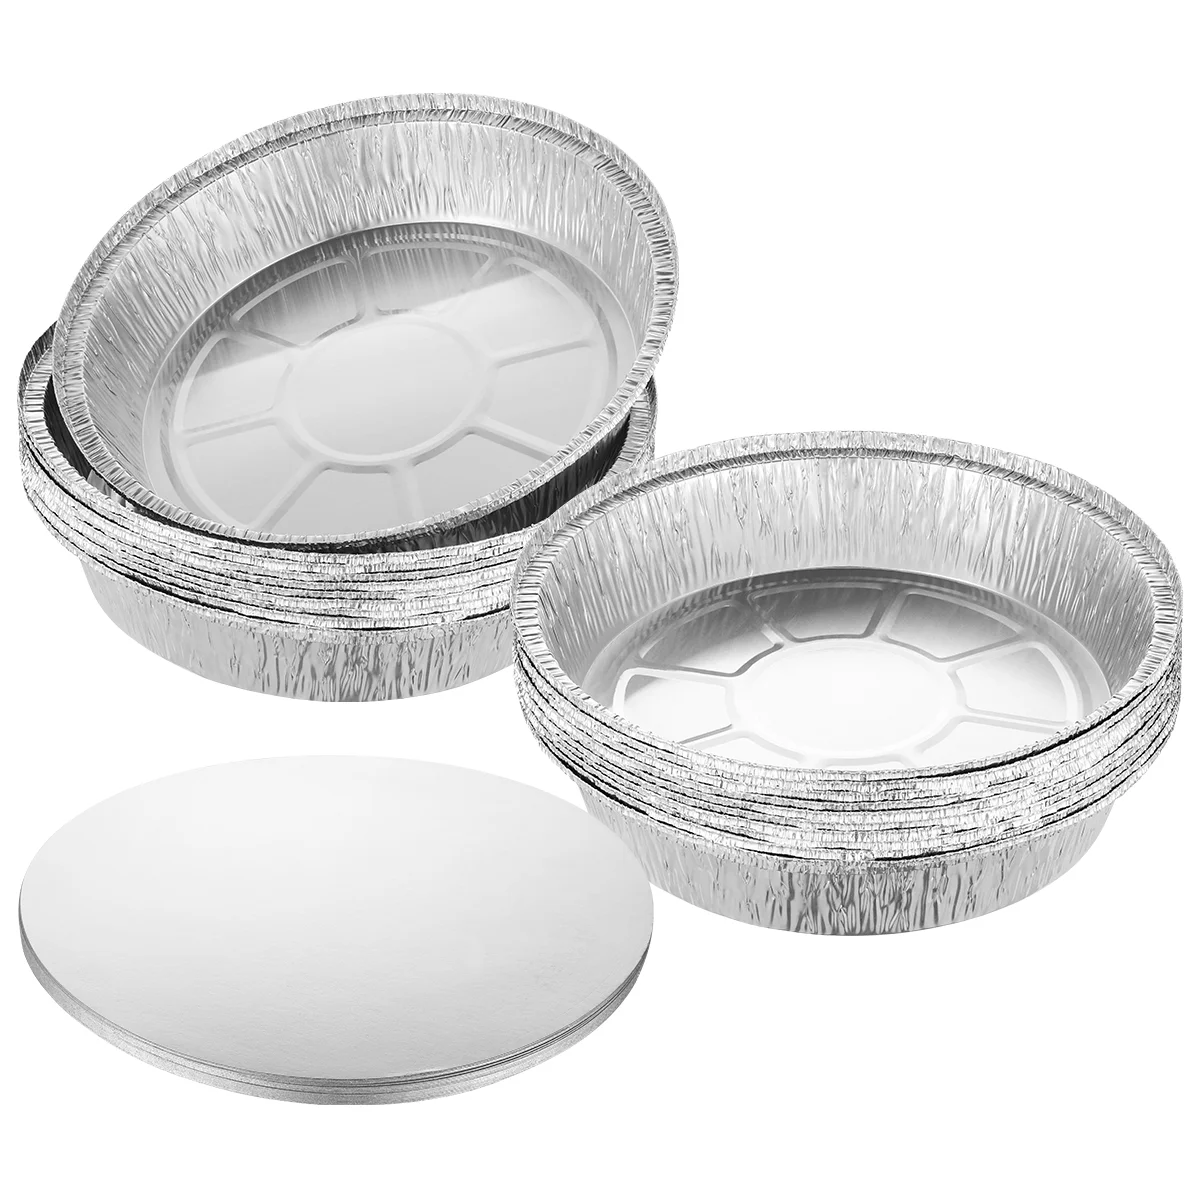 

Pan Pans Aluminumgrill Round Tray Drip Steam Lids Grease Tablehalf Size Deep Large Oven Trays Bread Paper Cardboard Tinloaf Duty